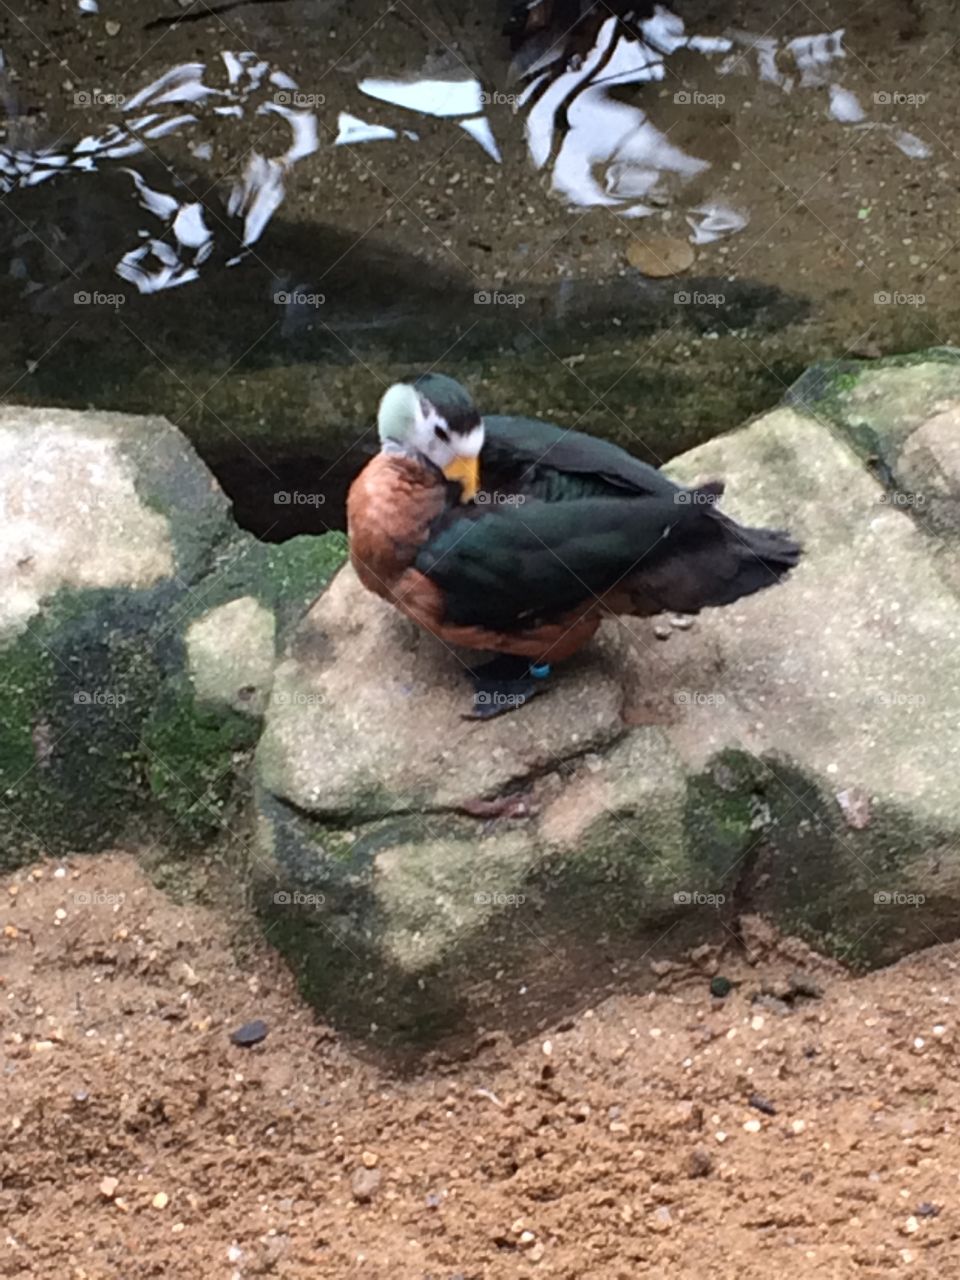 Duck at london zoo